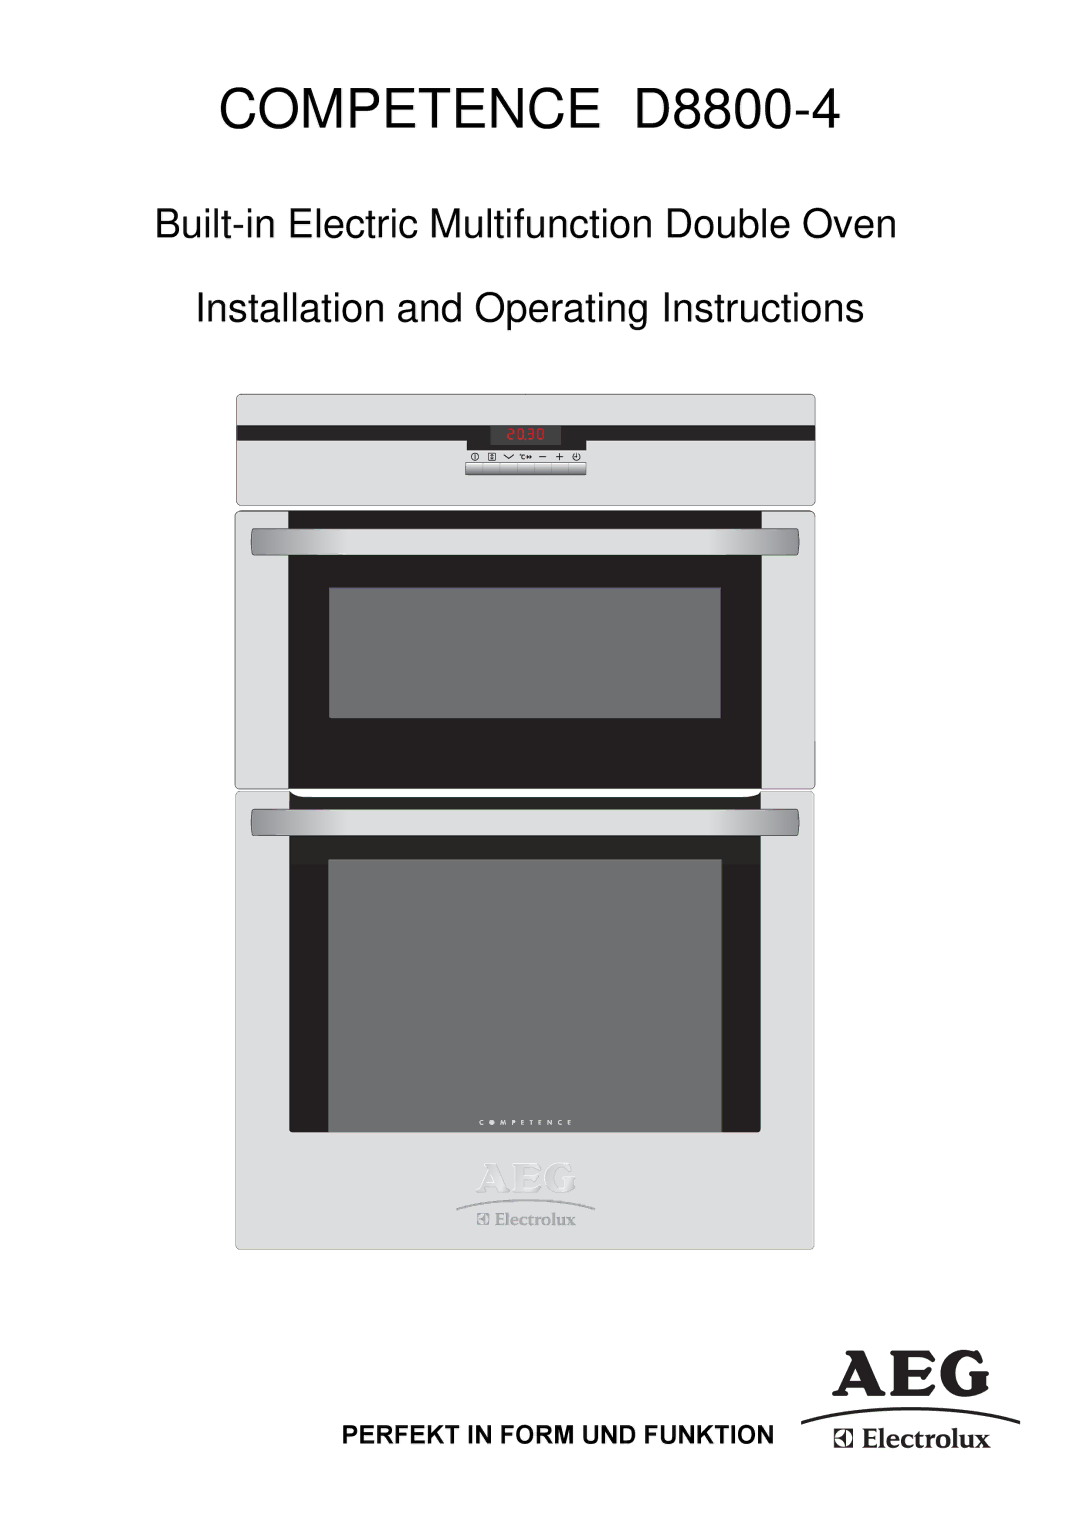 Electrolux operating instructions Competence D8800-4 